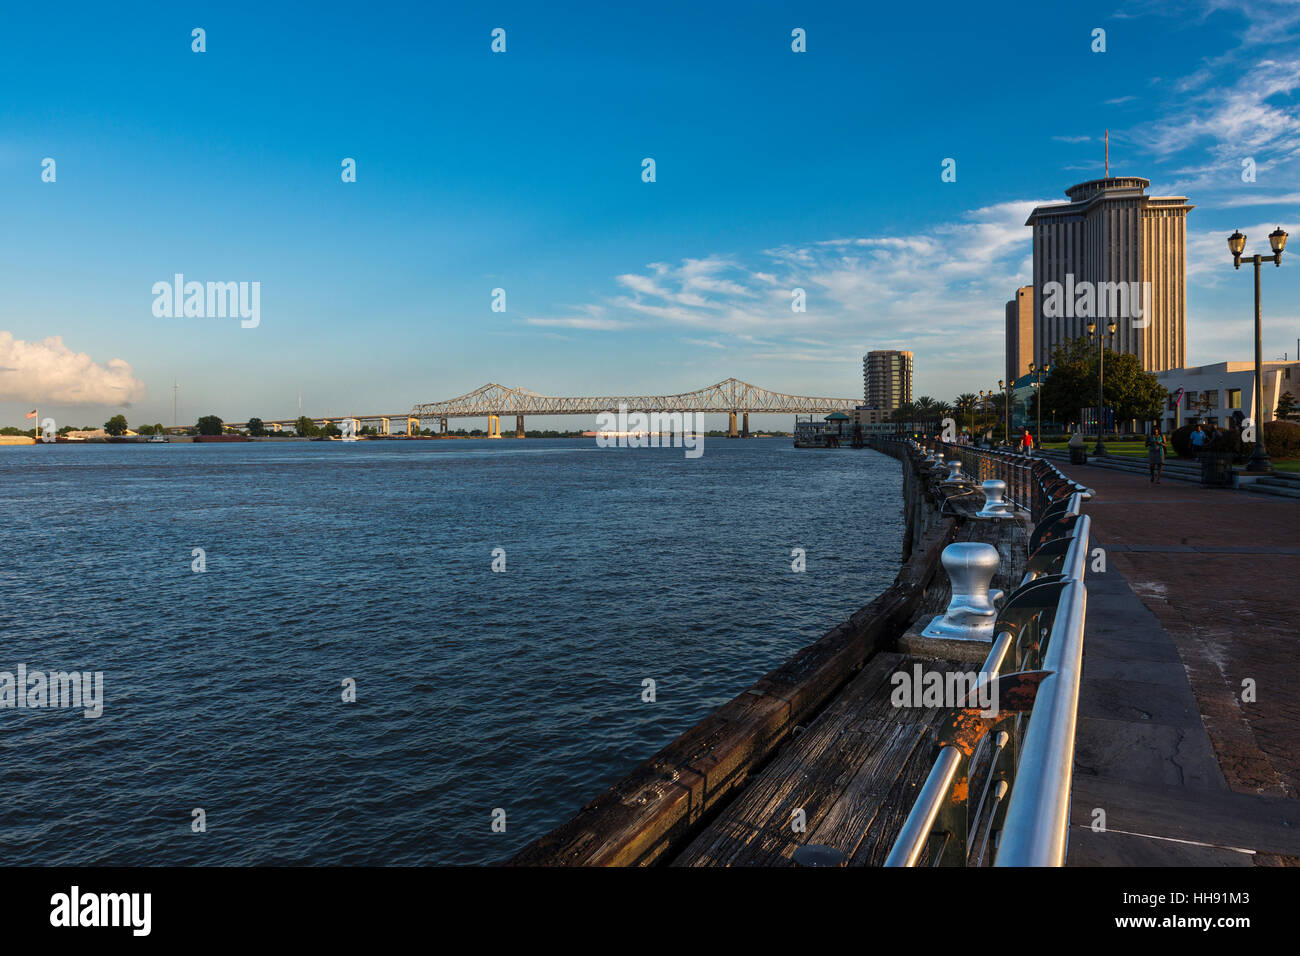 New Orleans, Louisiana, USA - June 18, 2014: View of the Mississippi River in the New Orleans riverfront. Stock Photo